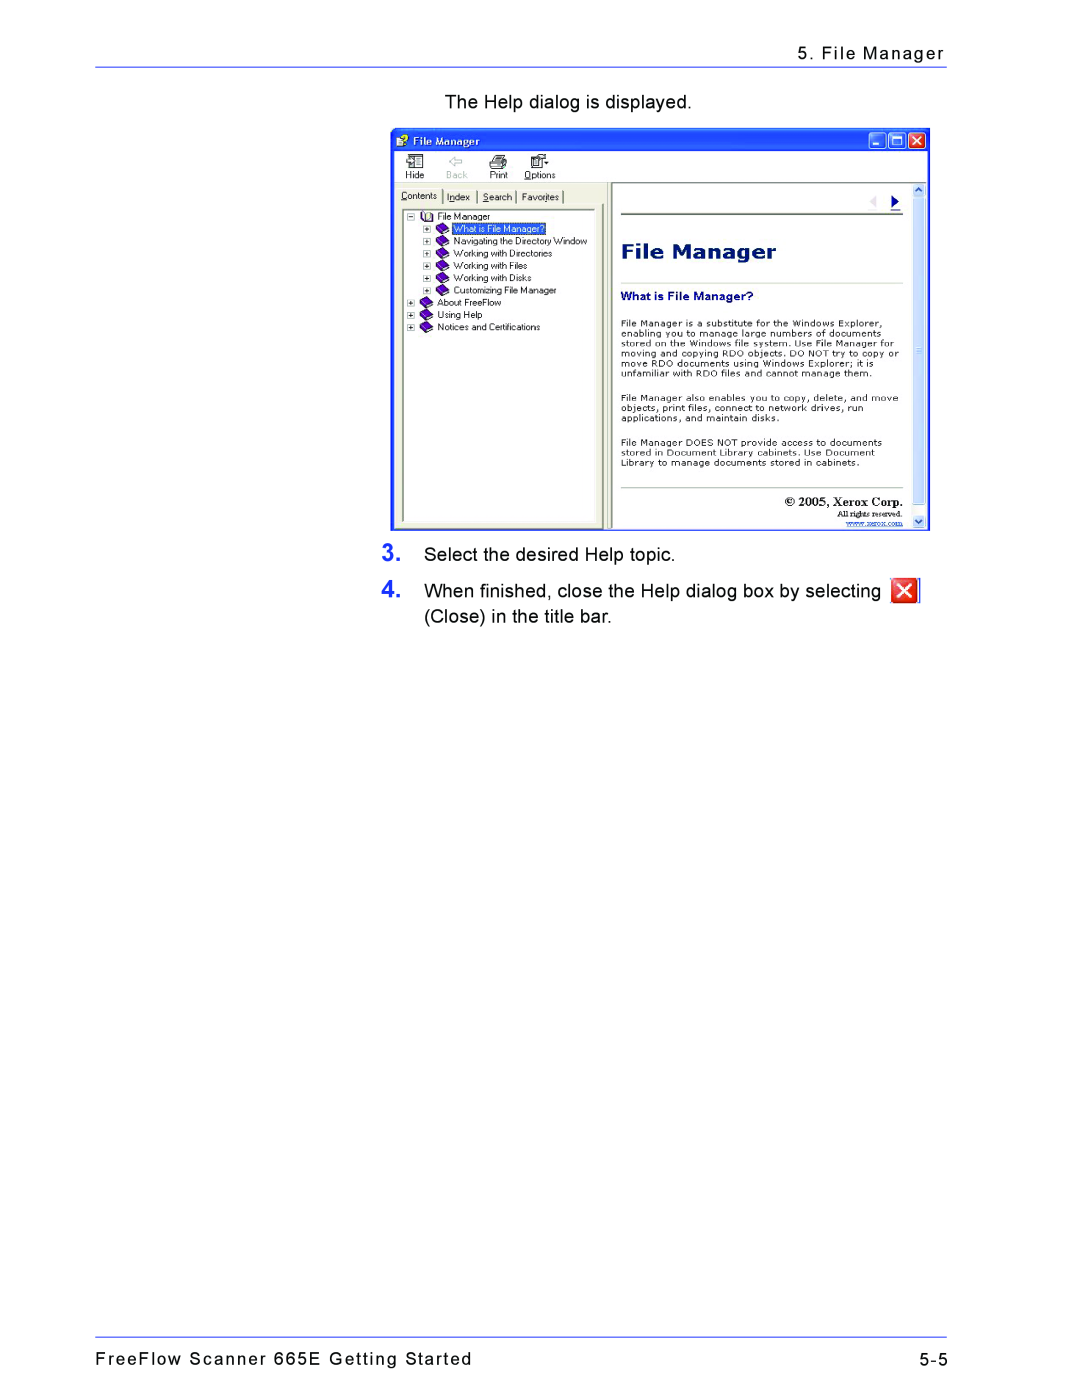 Xerox 665E manual The Help dialog is displayed 3. Select the desired Help topic, File Manager 